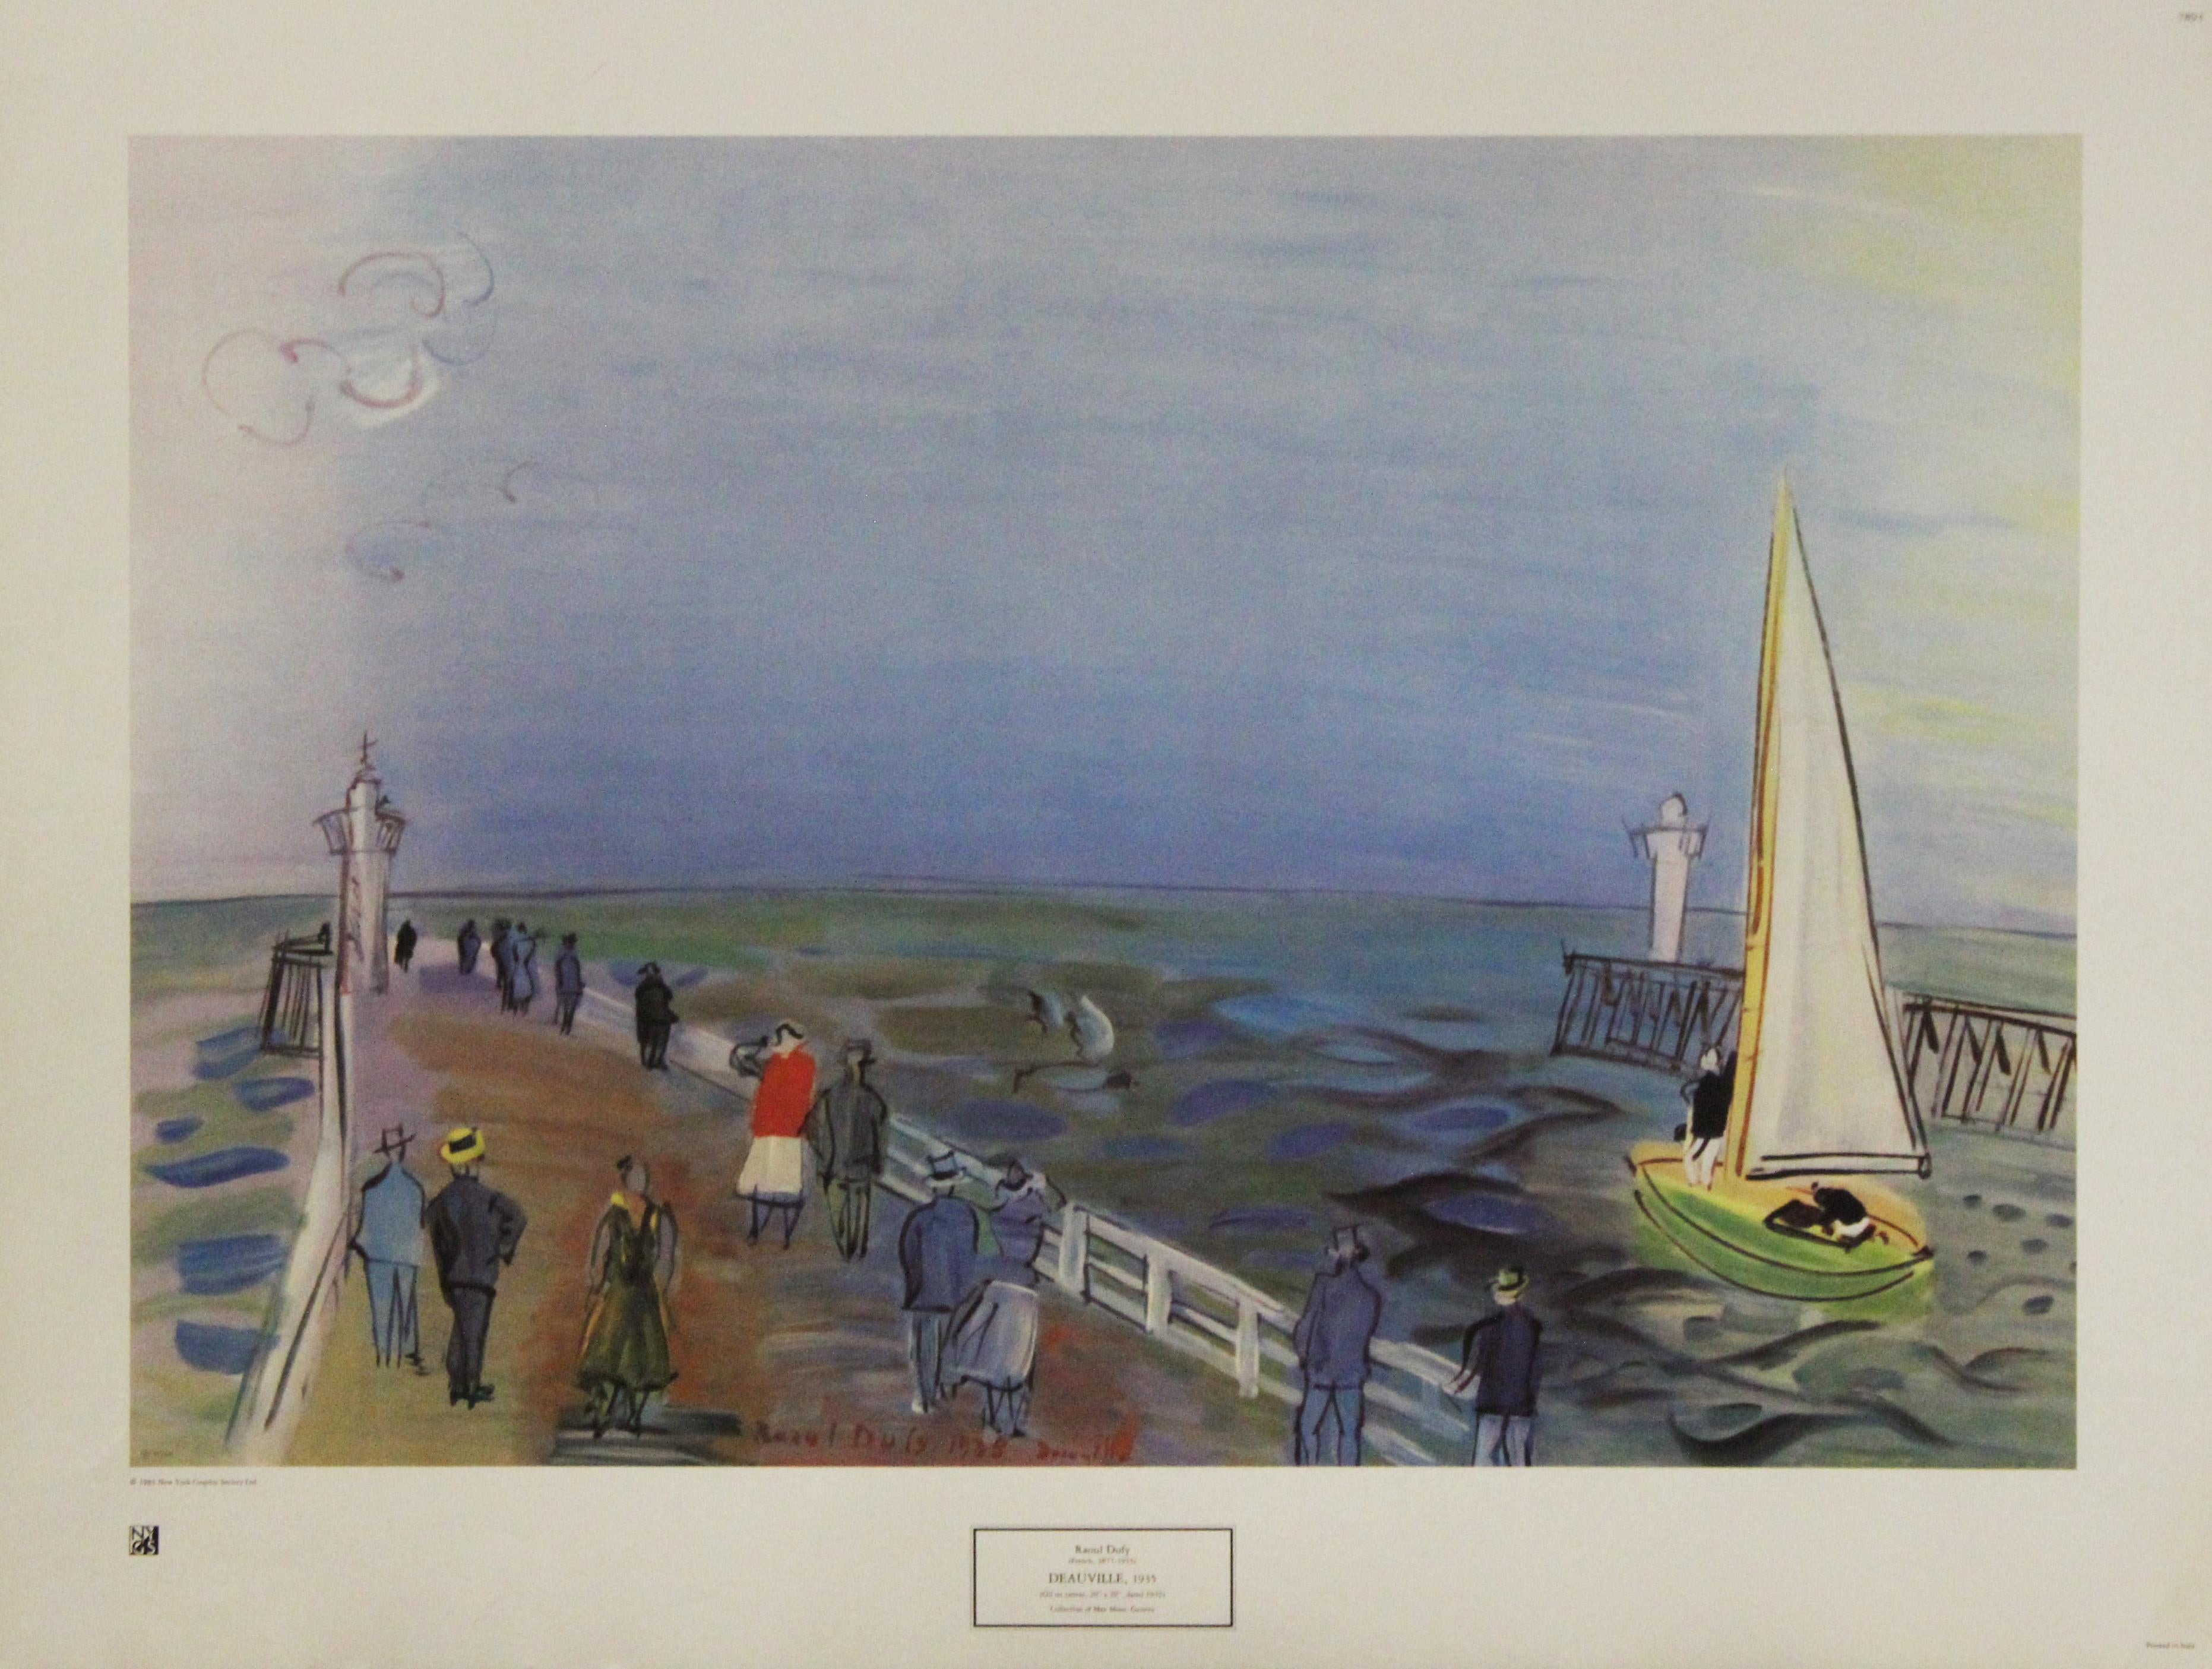 Raoul Dufy Landscape Print - "Deauville, 1935" Poster, New York Graphic Society. Printed in Italy